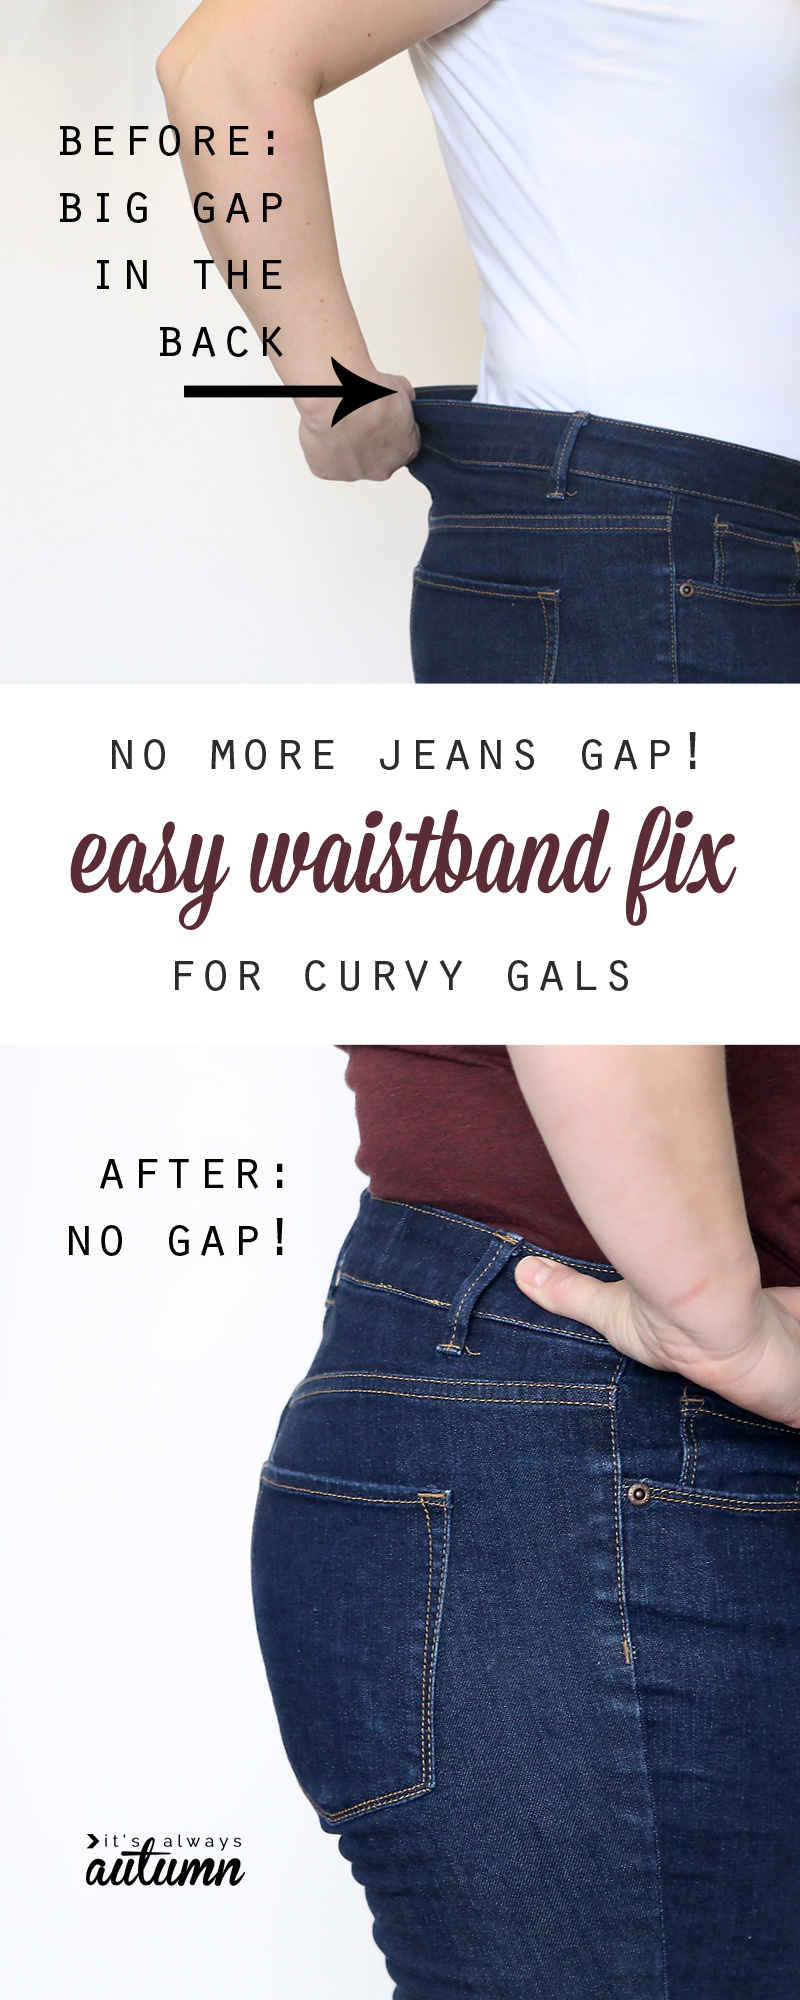 A person showing how jeans gap in the back, then showing how the gap is fixed